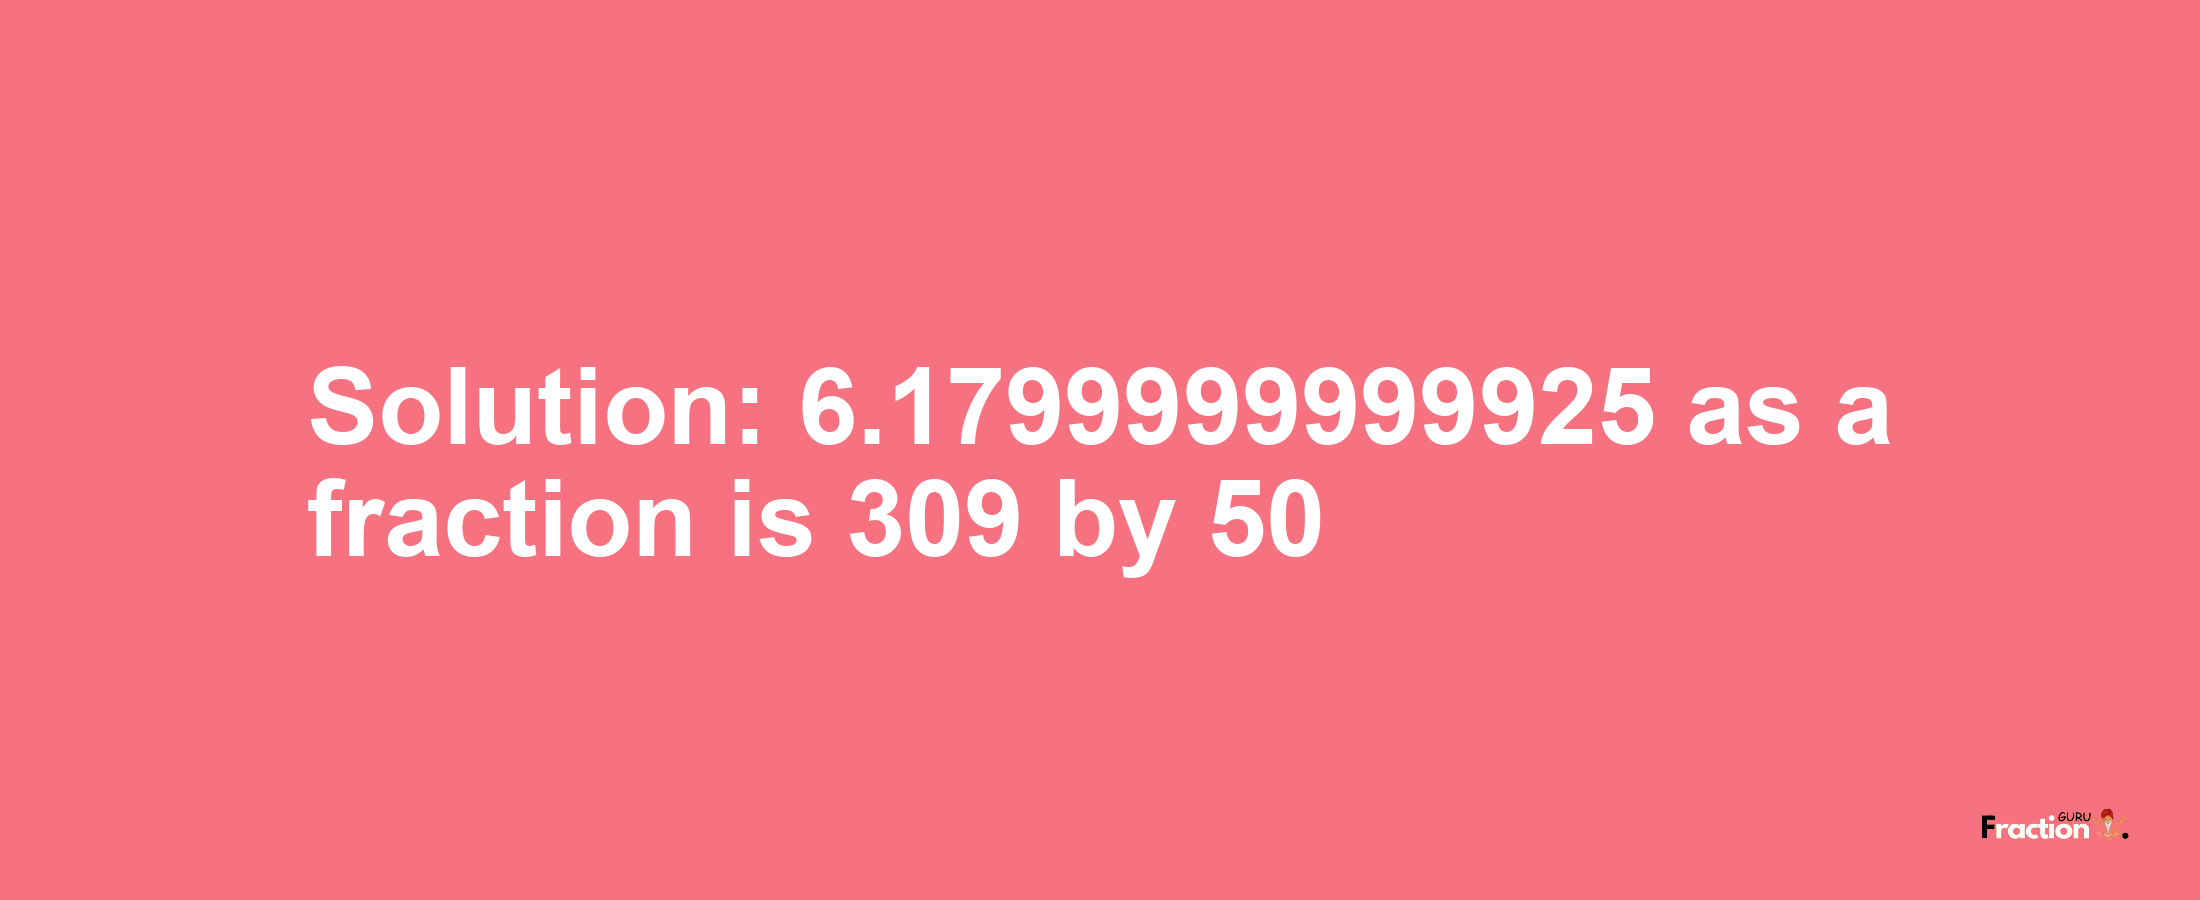 Solution:6.1799999999925 as a fraction is 309/50